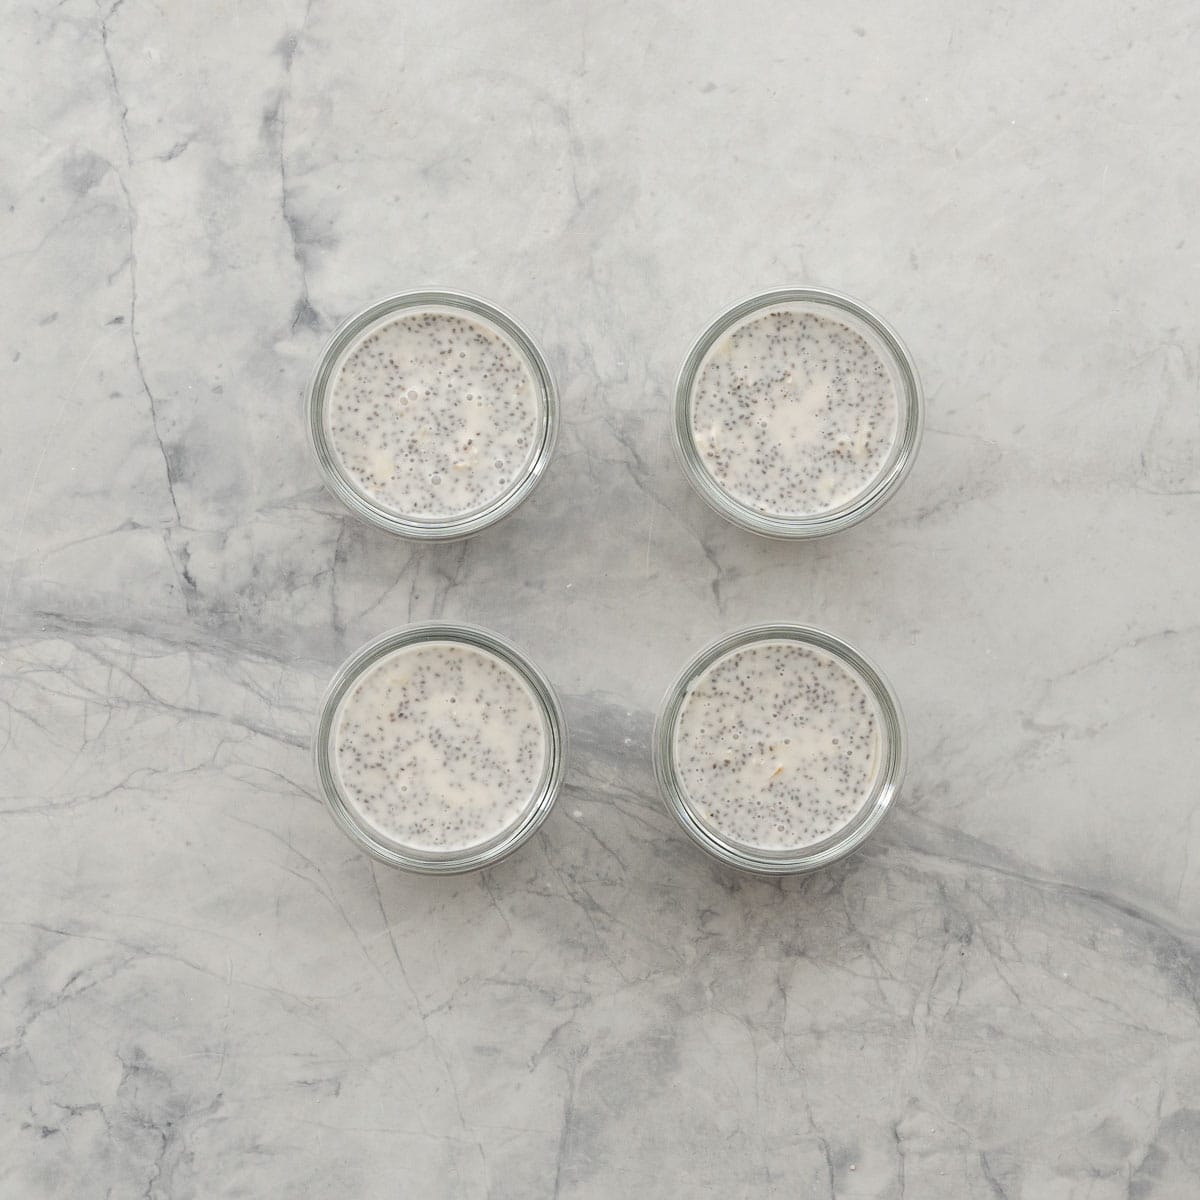 Birds eye view of four containers filled with coconut chia pudding.